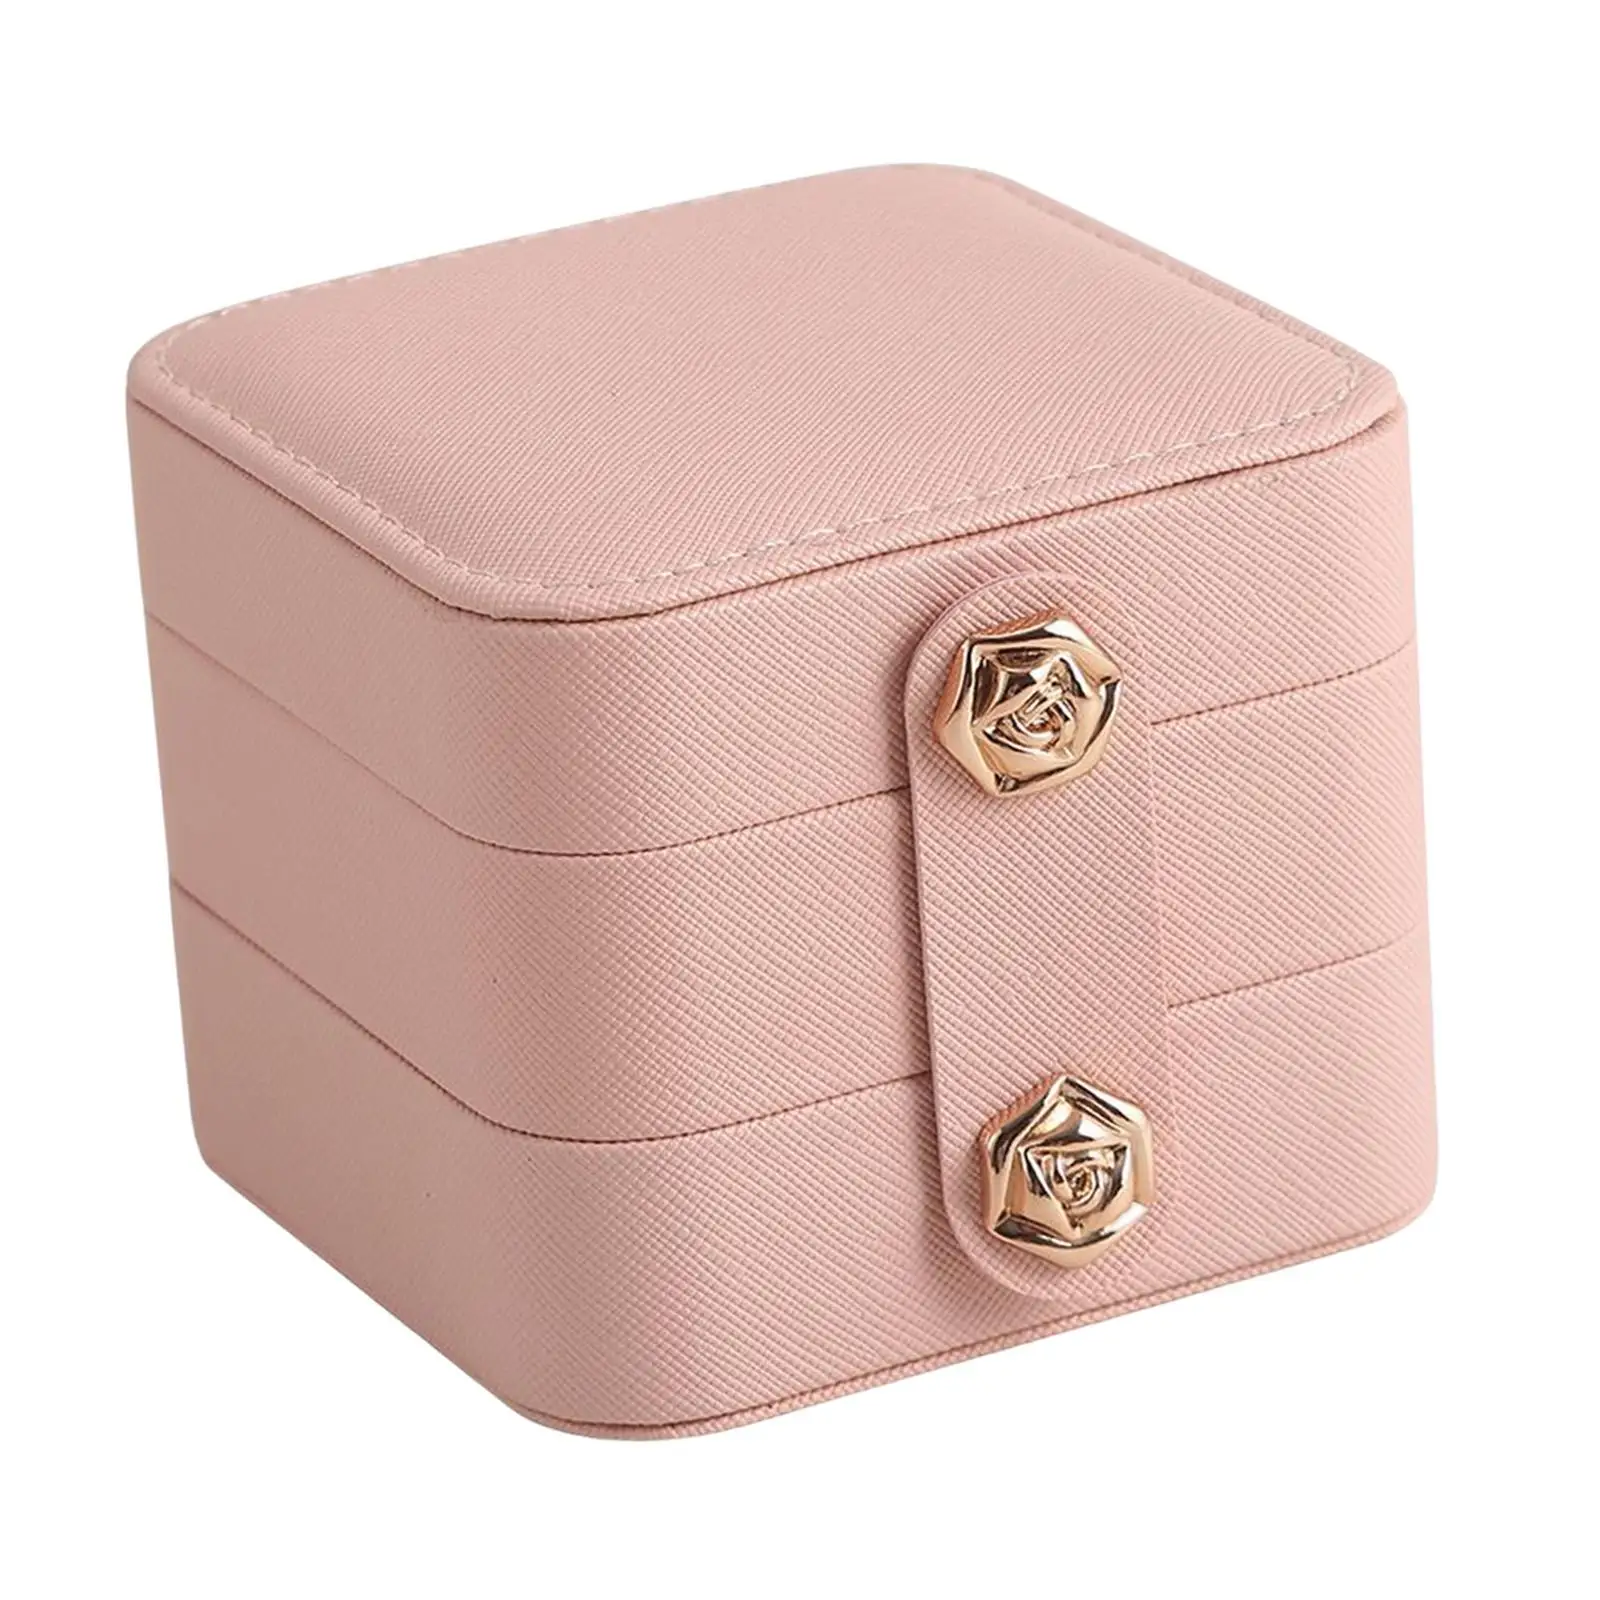 

Travel Jewelry Box Dustproof Soft Velvet Lined Multi Layers Multifunctional Holder Storage Case for Earrings Ear Studs Necklaces